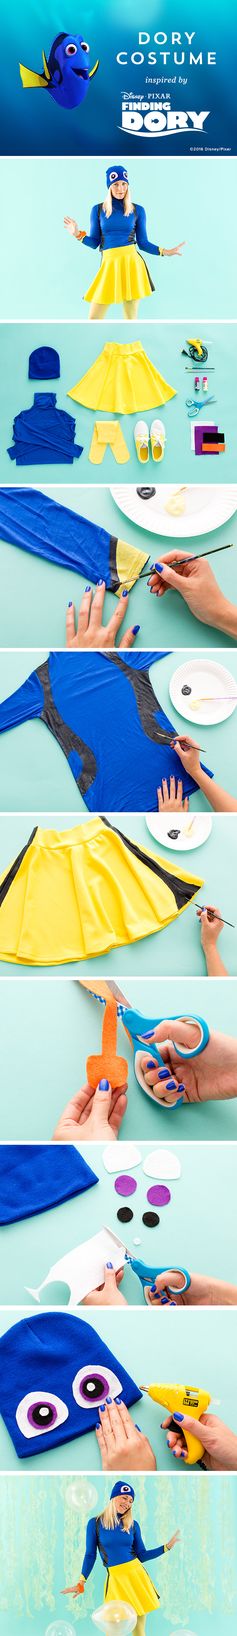 How to DIY a Dory Costume From Finding Dory